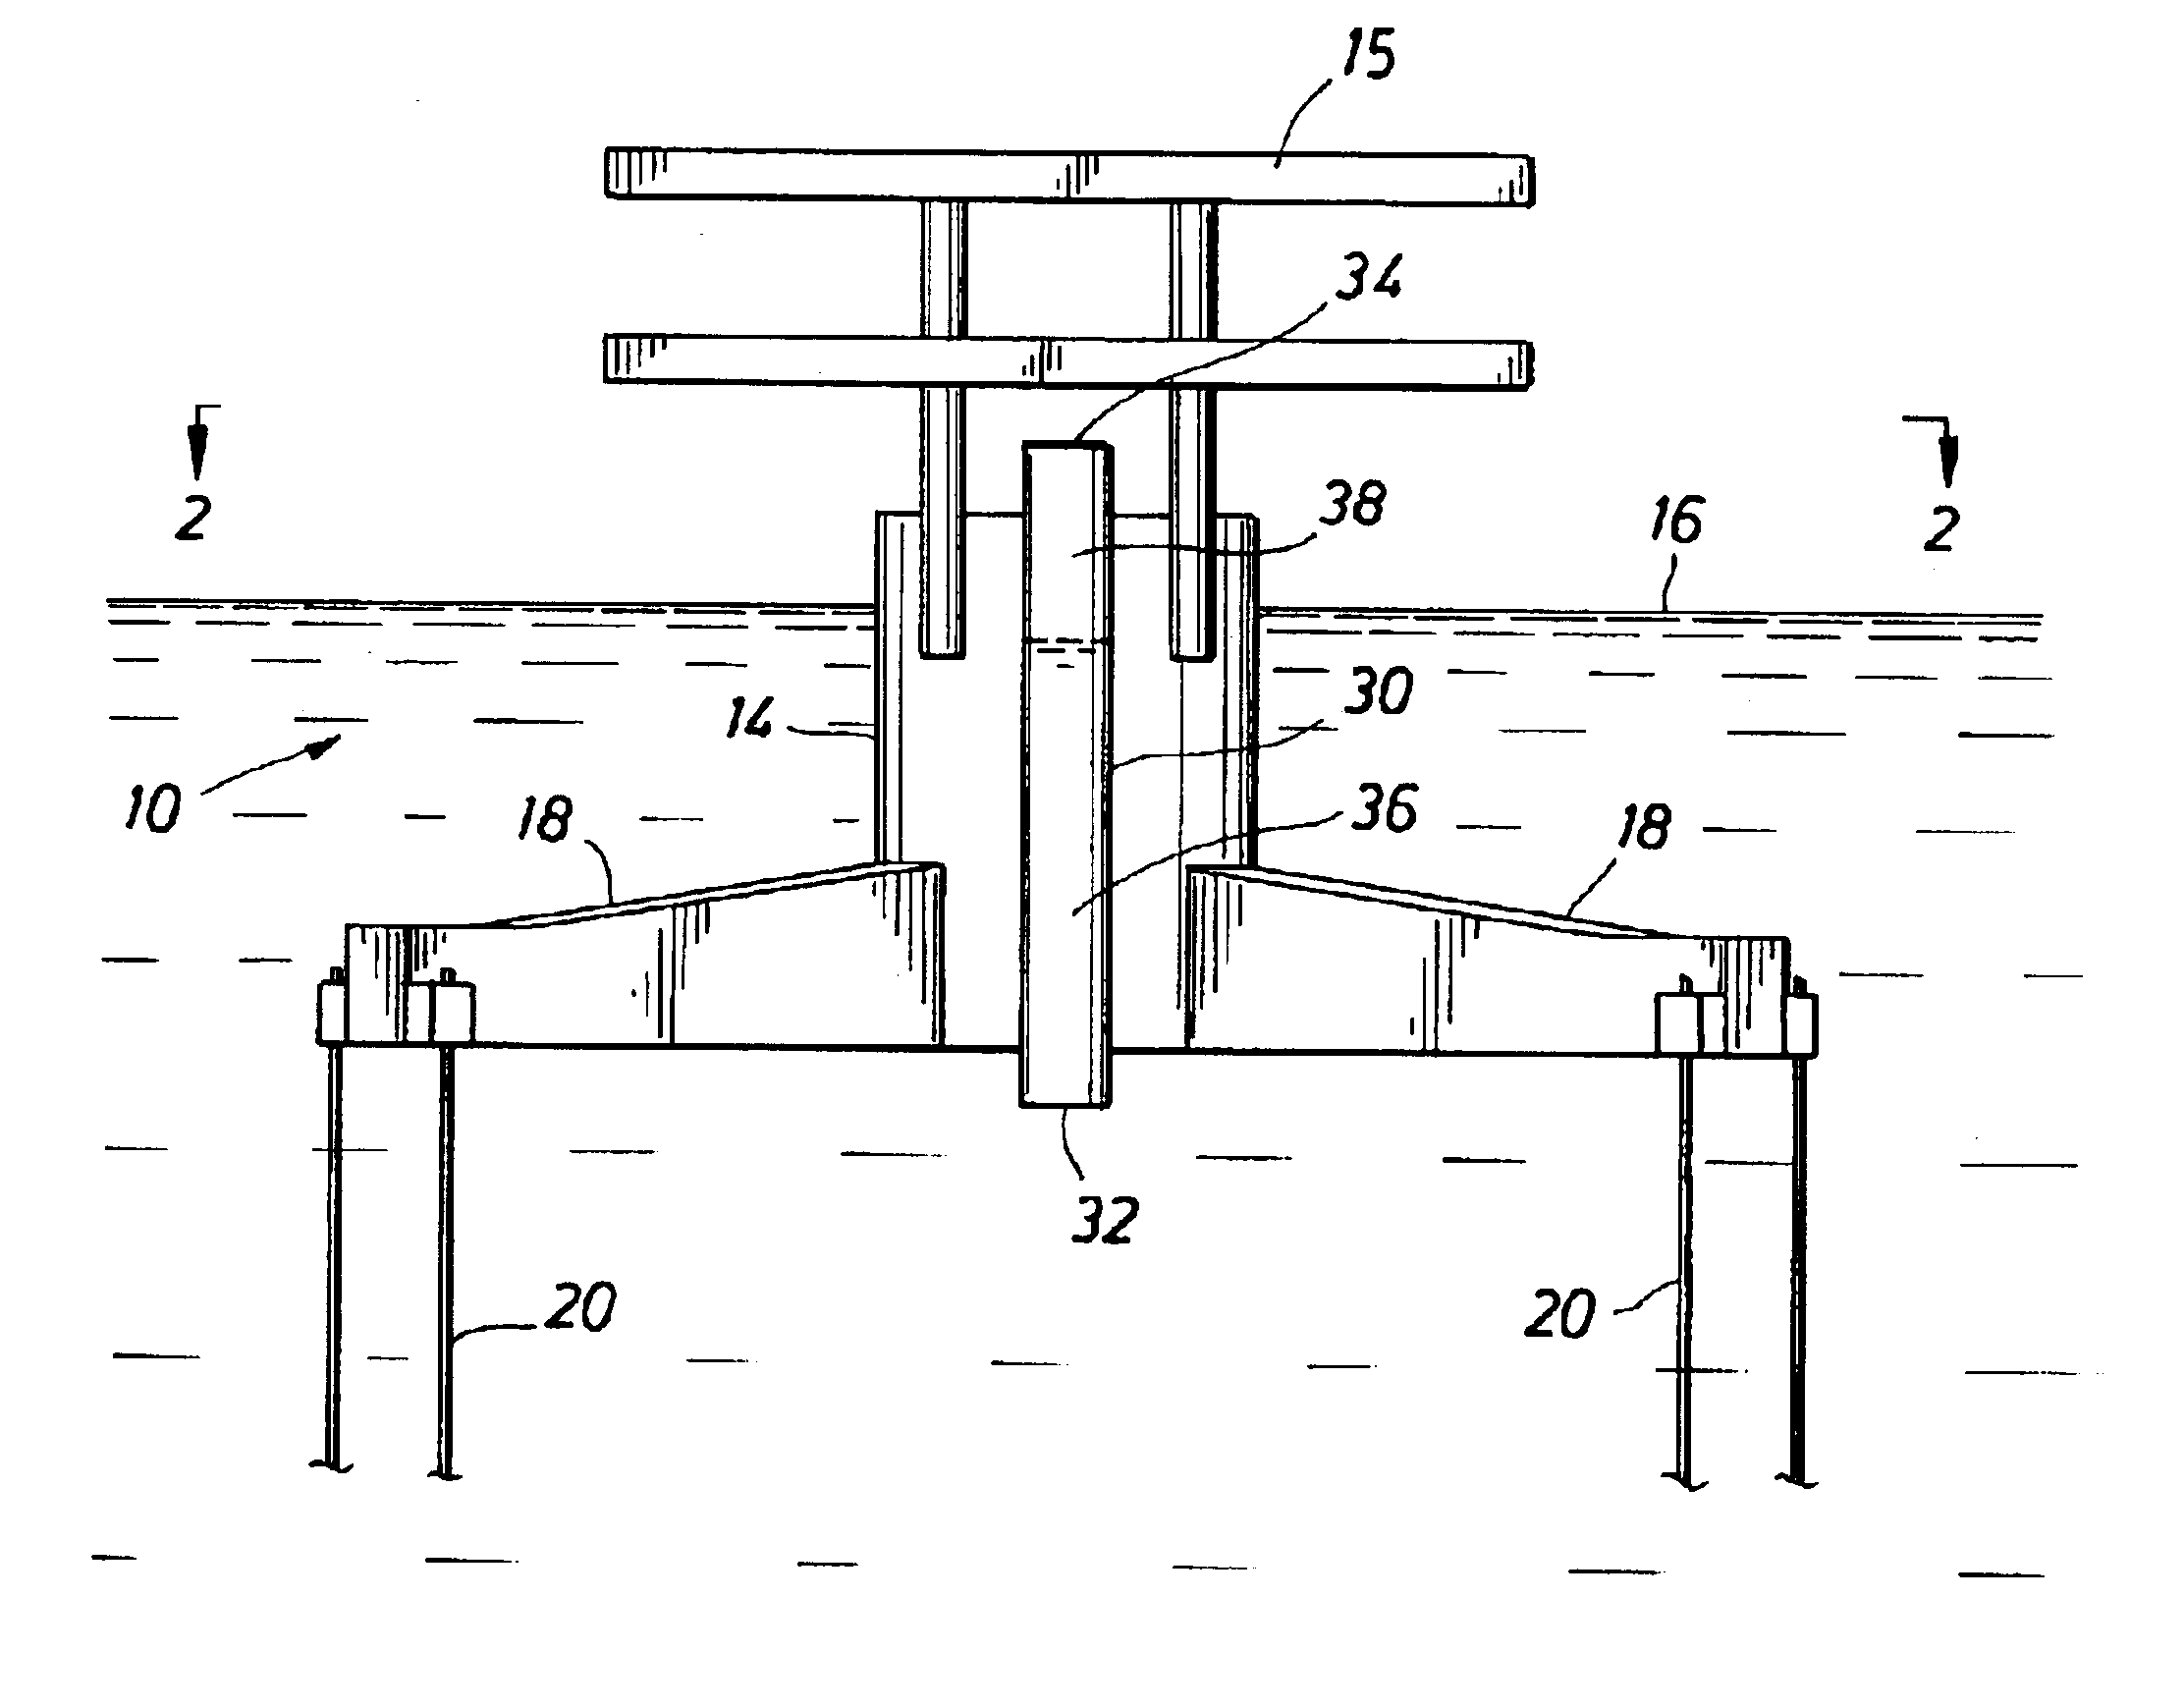 Oscillation suppression and control system for a floating platform